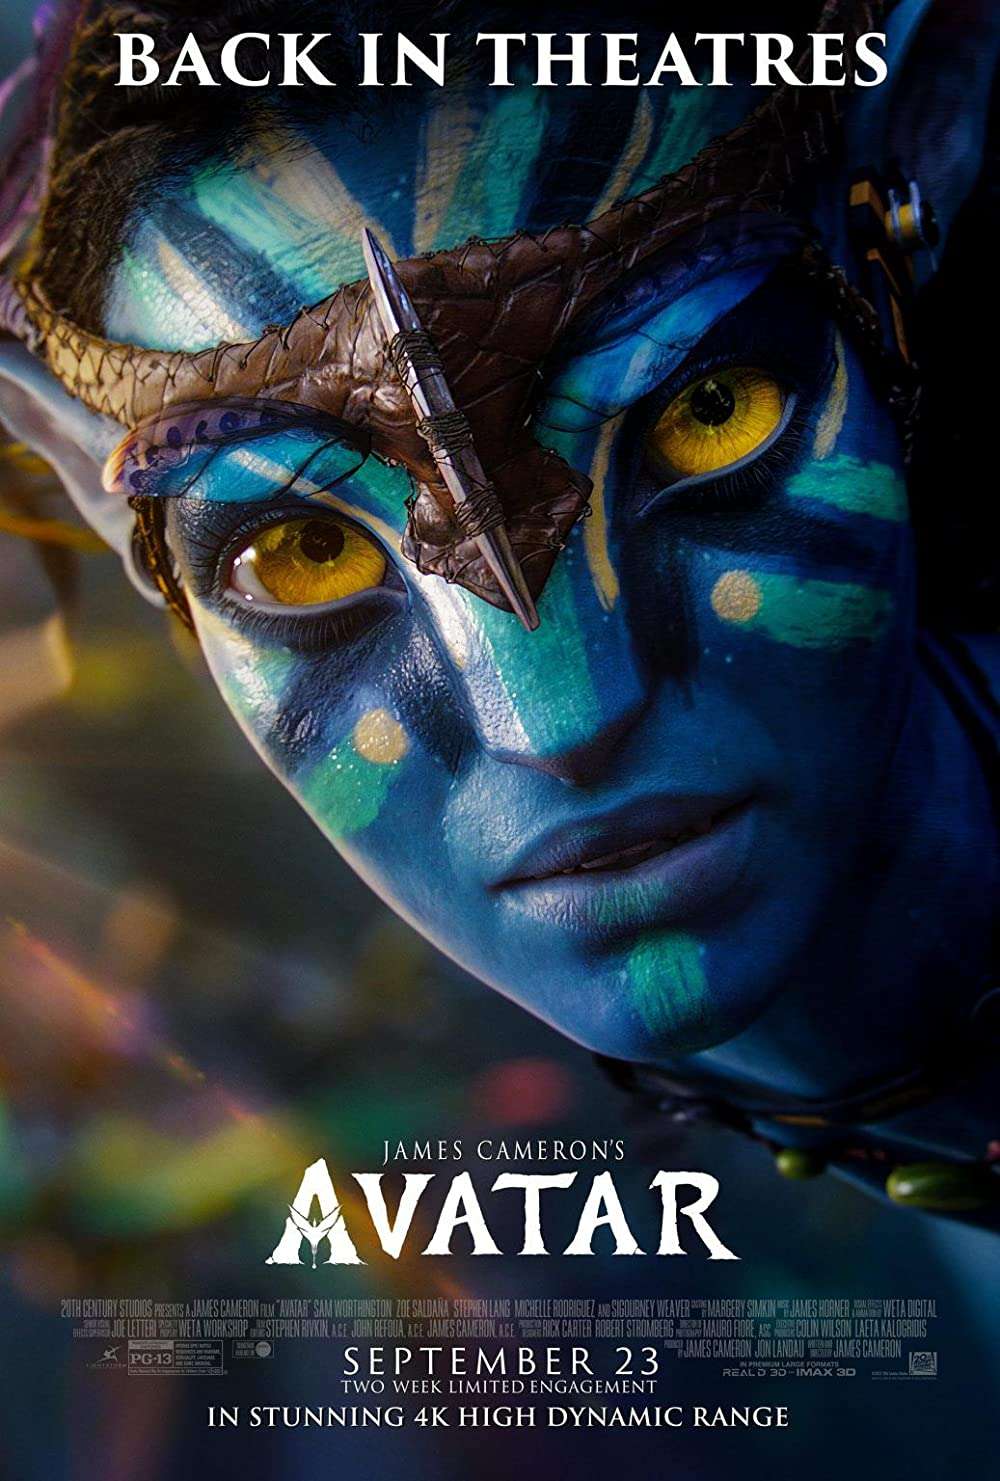 Avatar re-released in theatres